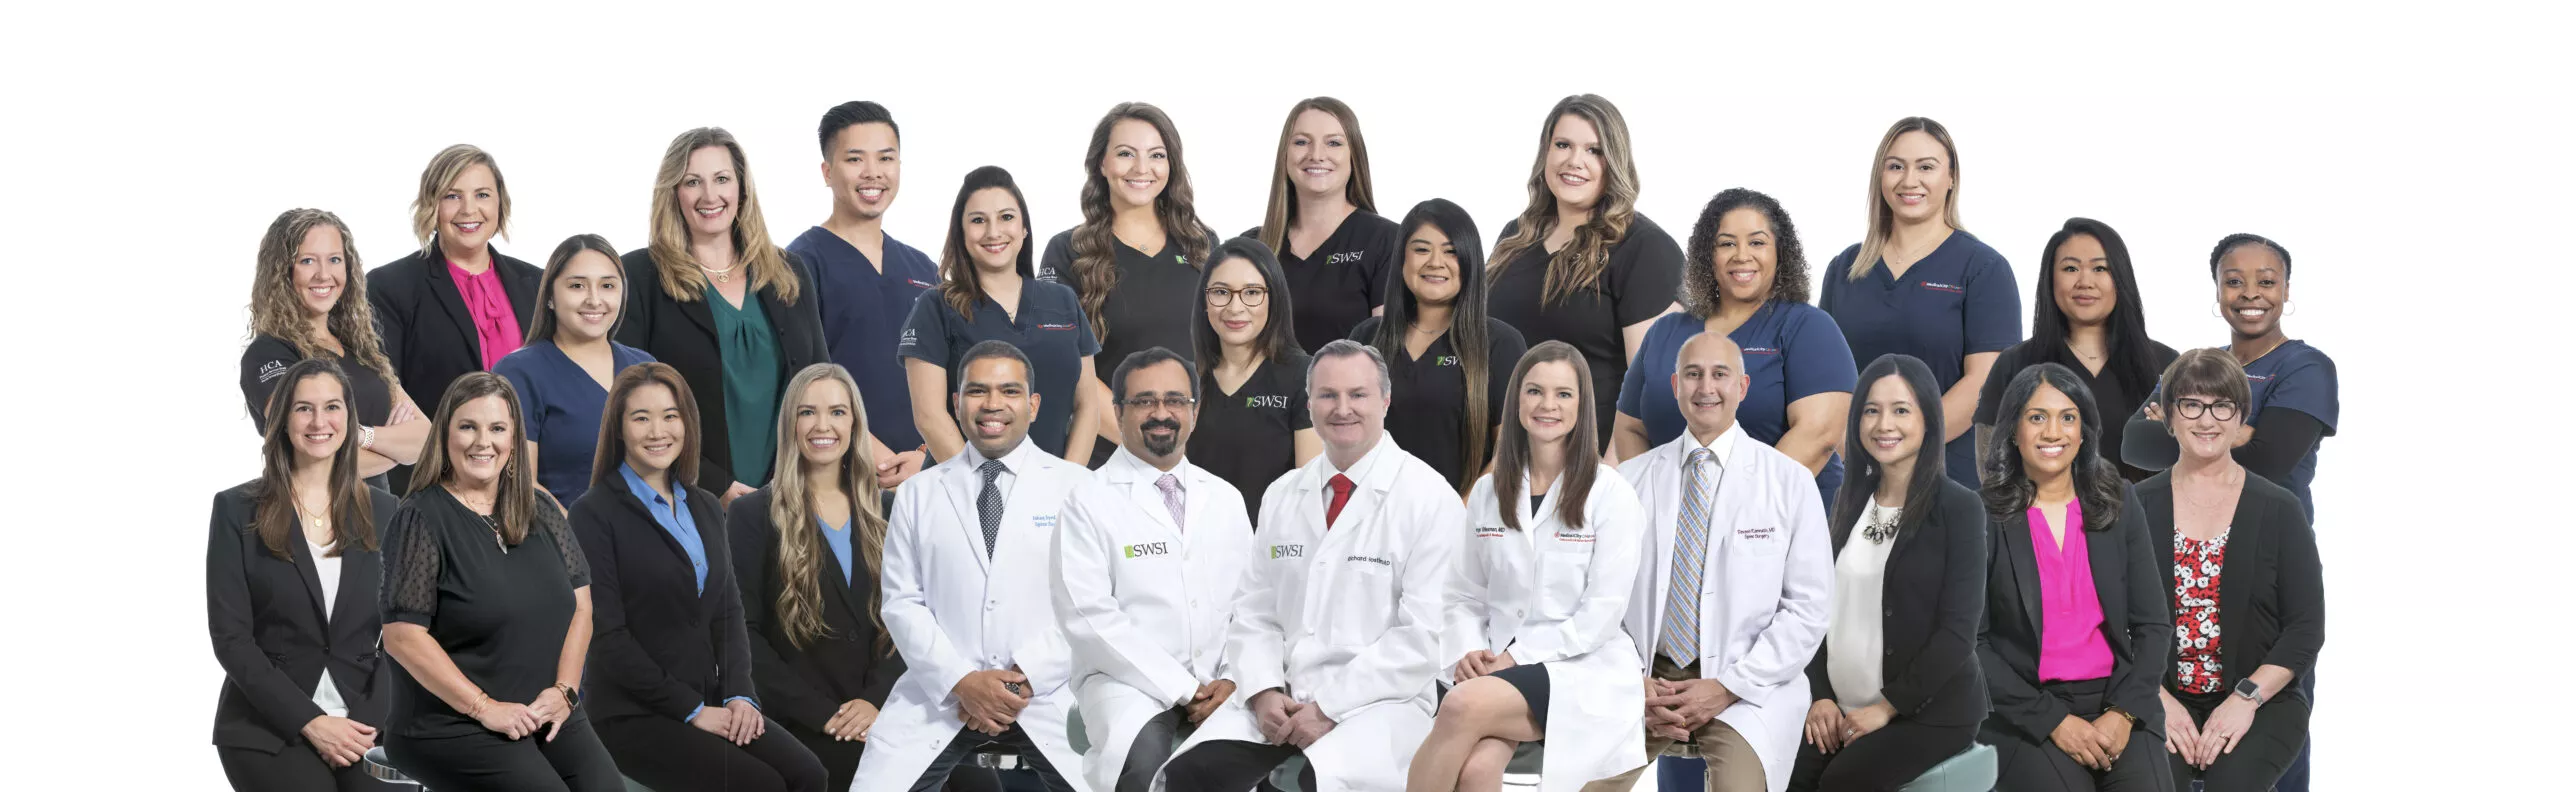 Scoliosis and Spine Institute Physicians and Staff